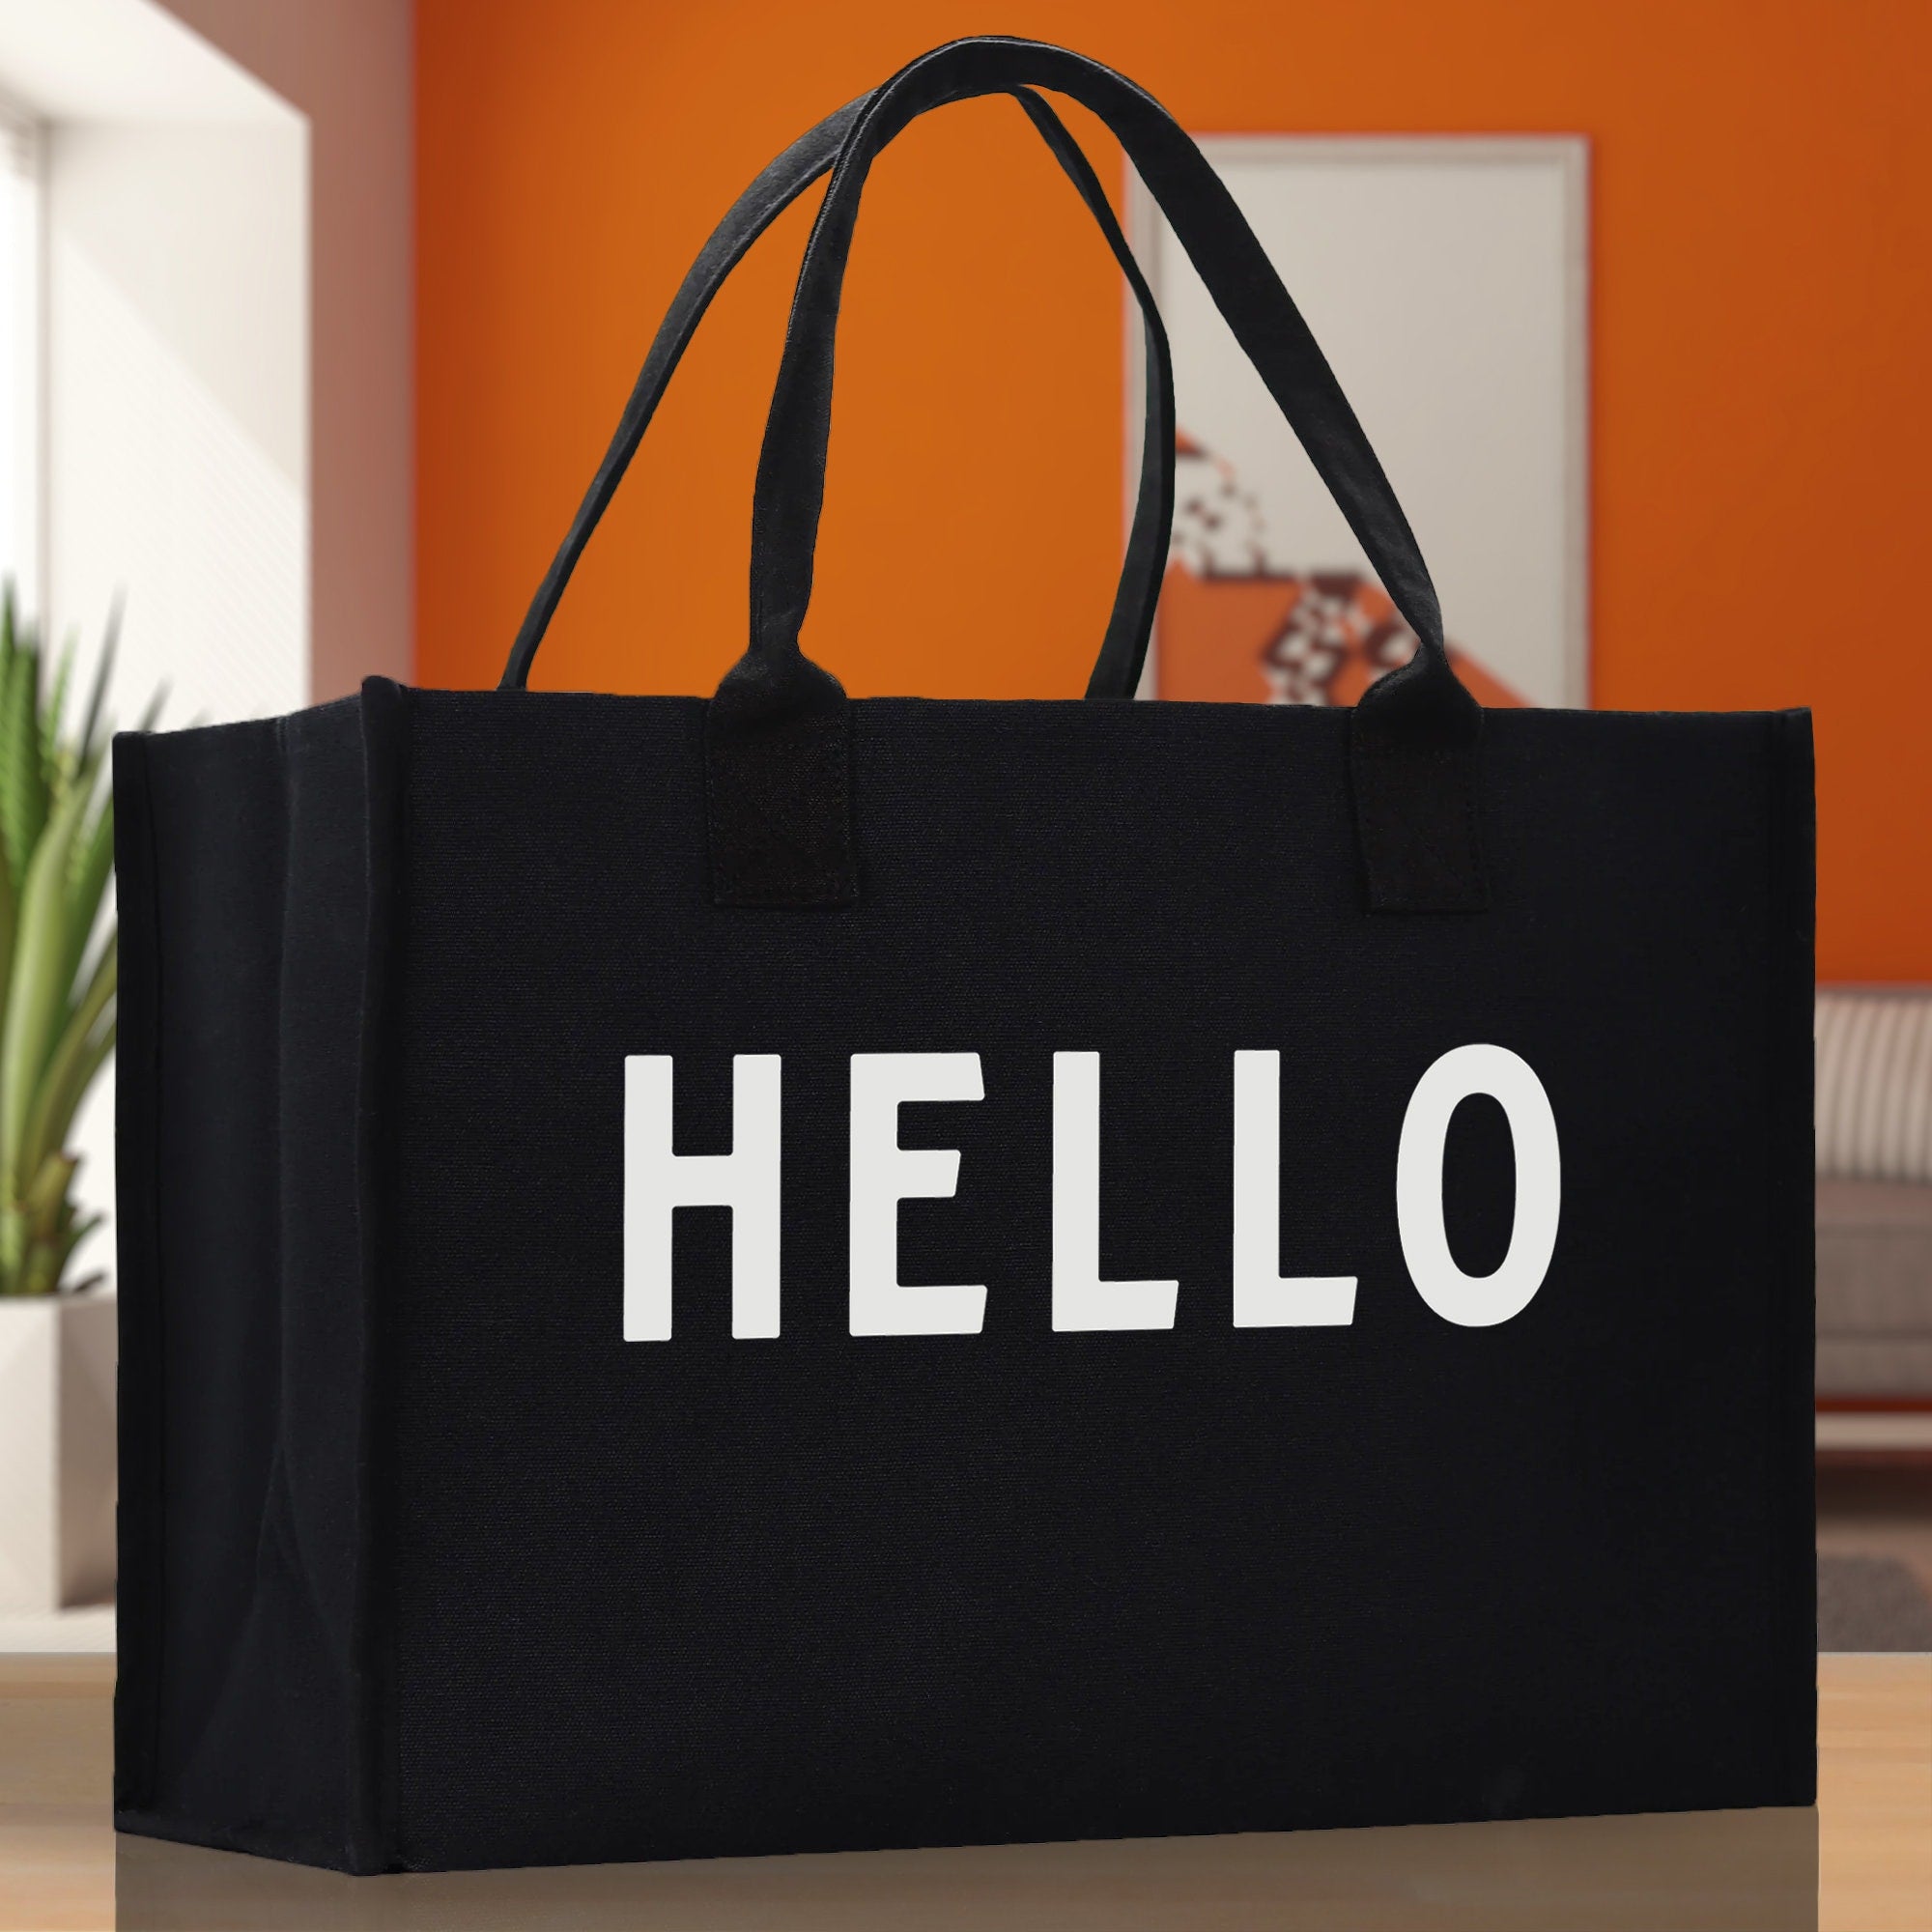 Hello Cotton Canvas Chic Beach Tote Bag Multipurpose Tote Weekender Tote Gift for Her Outdoor Tote Vacation Tote Large Beach Bag